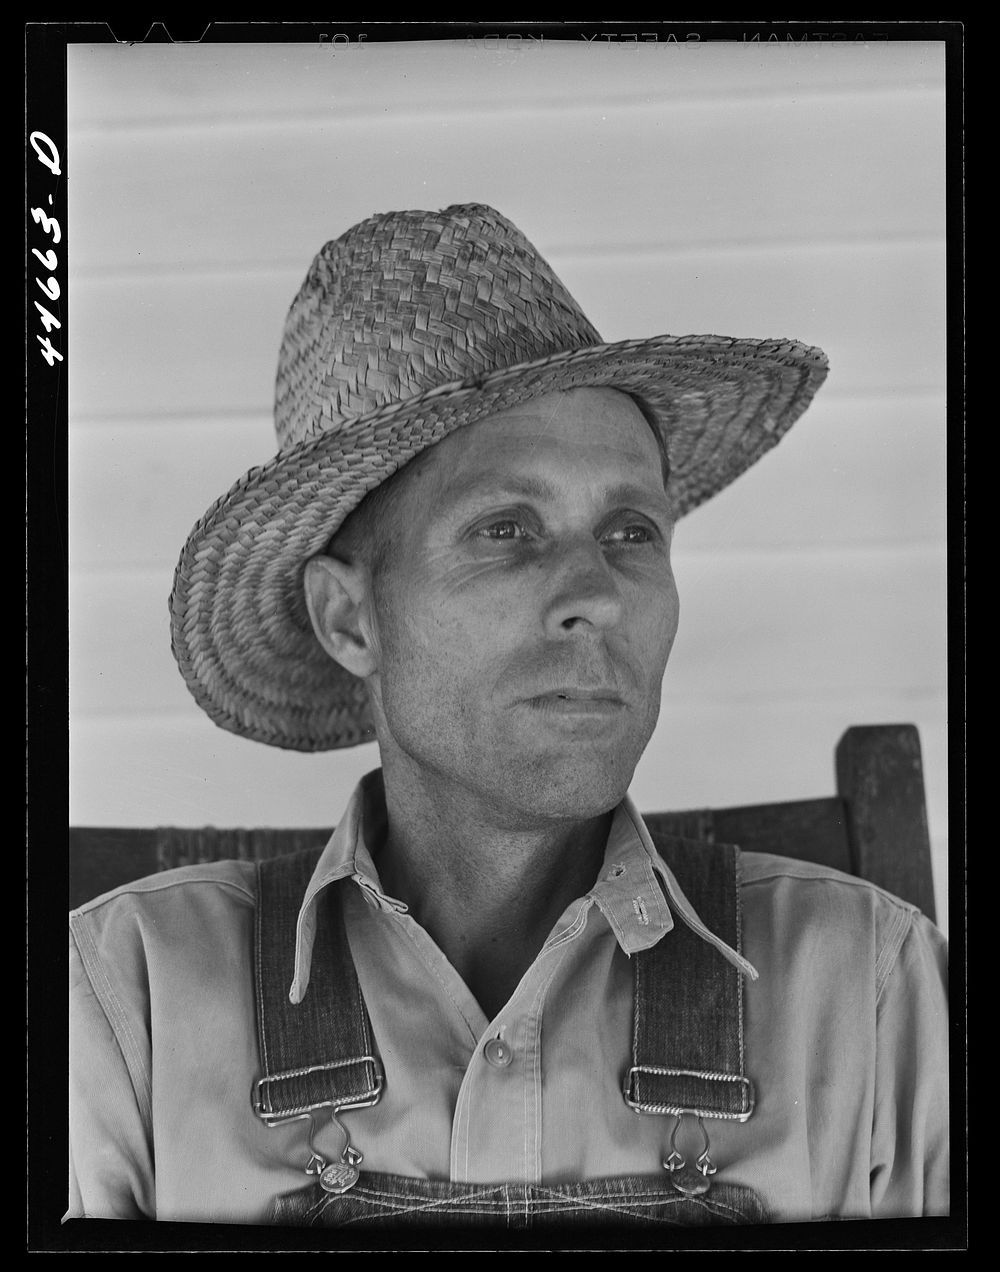 Mr. L. H. Cook, tenant purchase FSA (Farm Security Administration) client. Woodville, Greene County, Georgia. Sourced from…